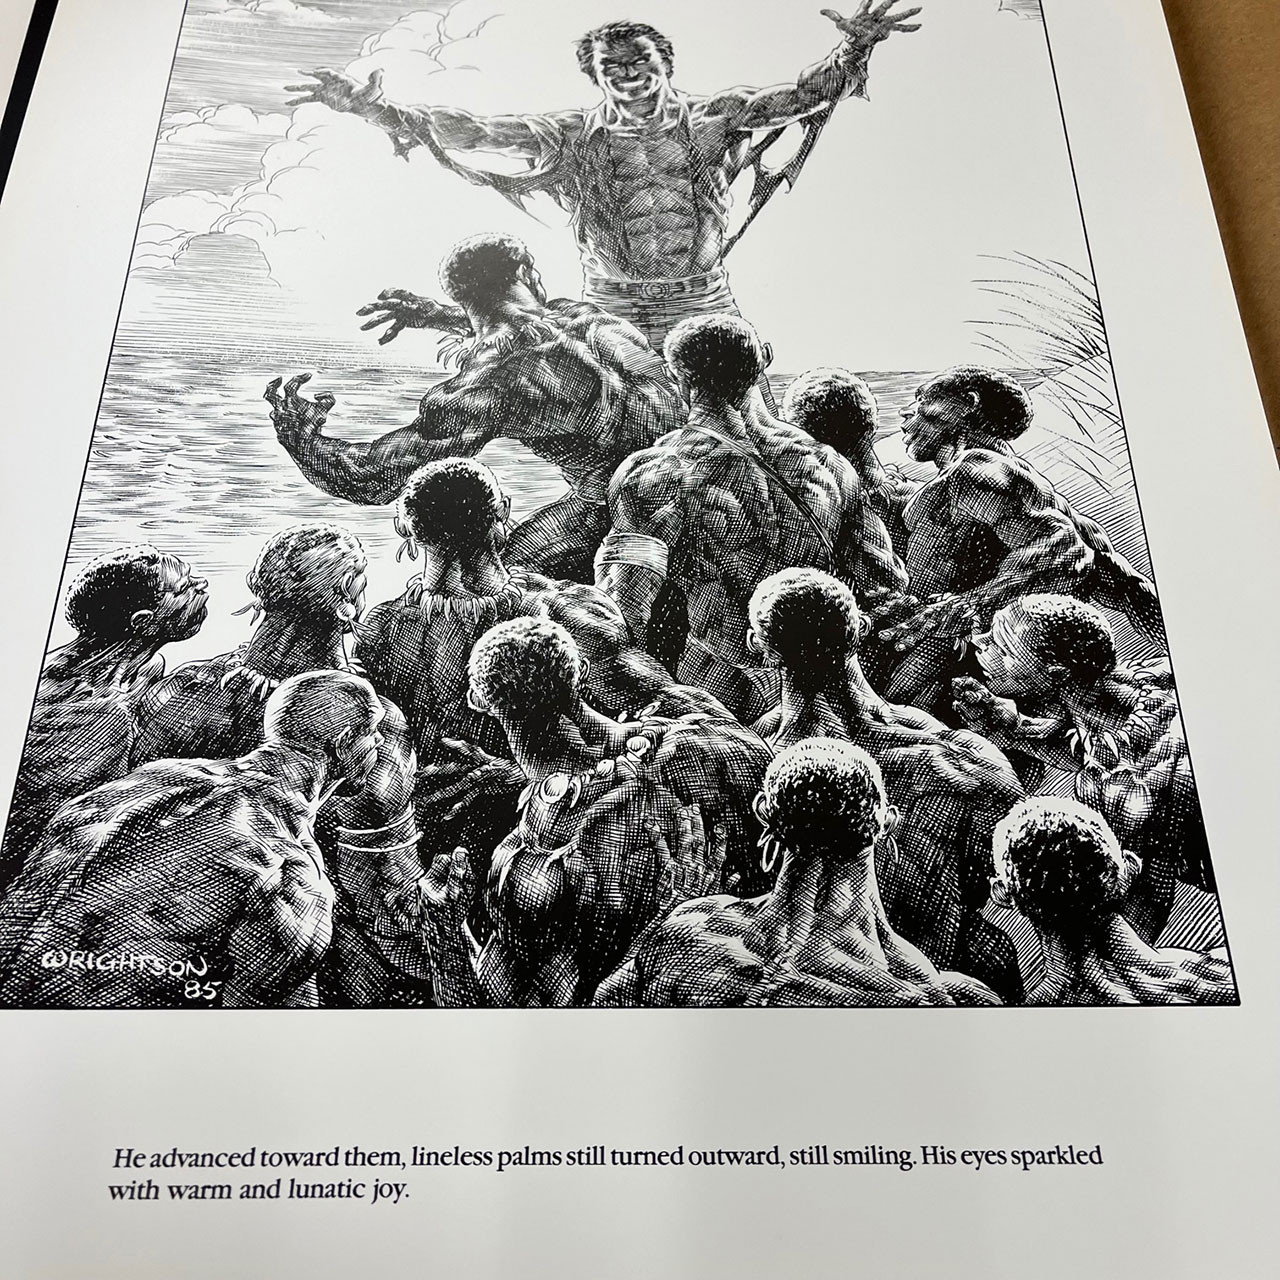 Stephen King "The Stand" Artwork Portfolio by Bernie Wrightson, Signed Limited Edition No. 1043 of 1200